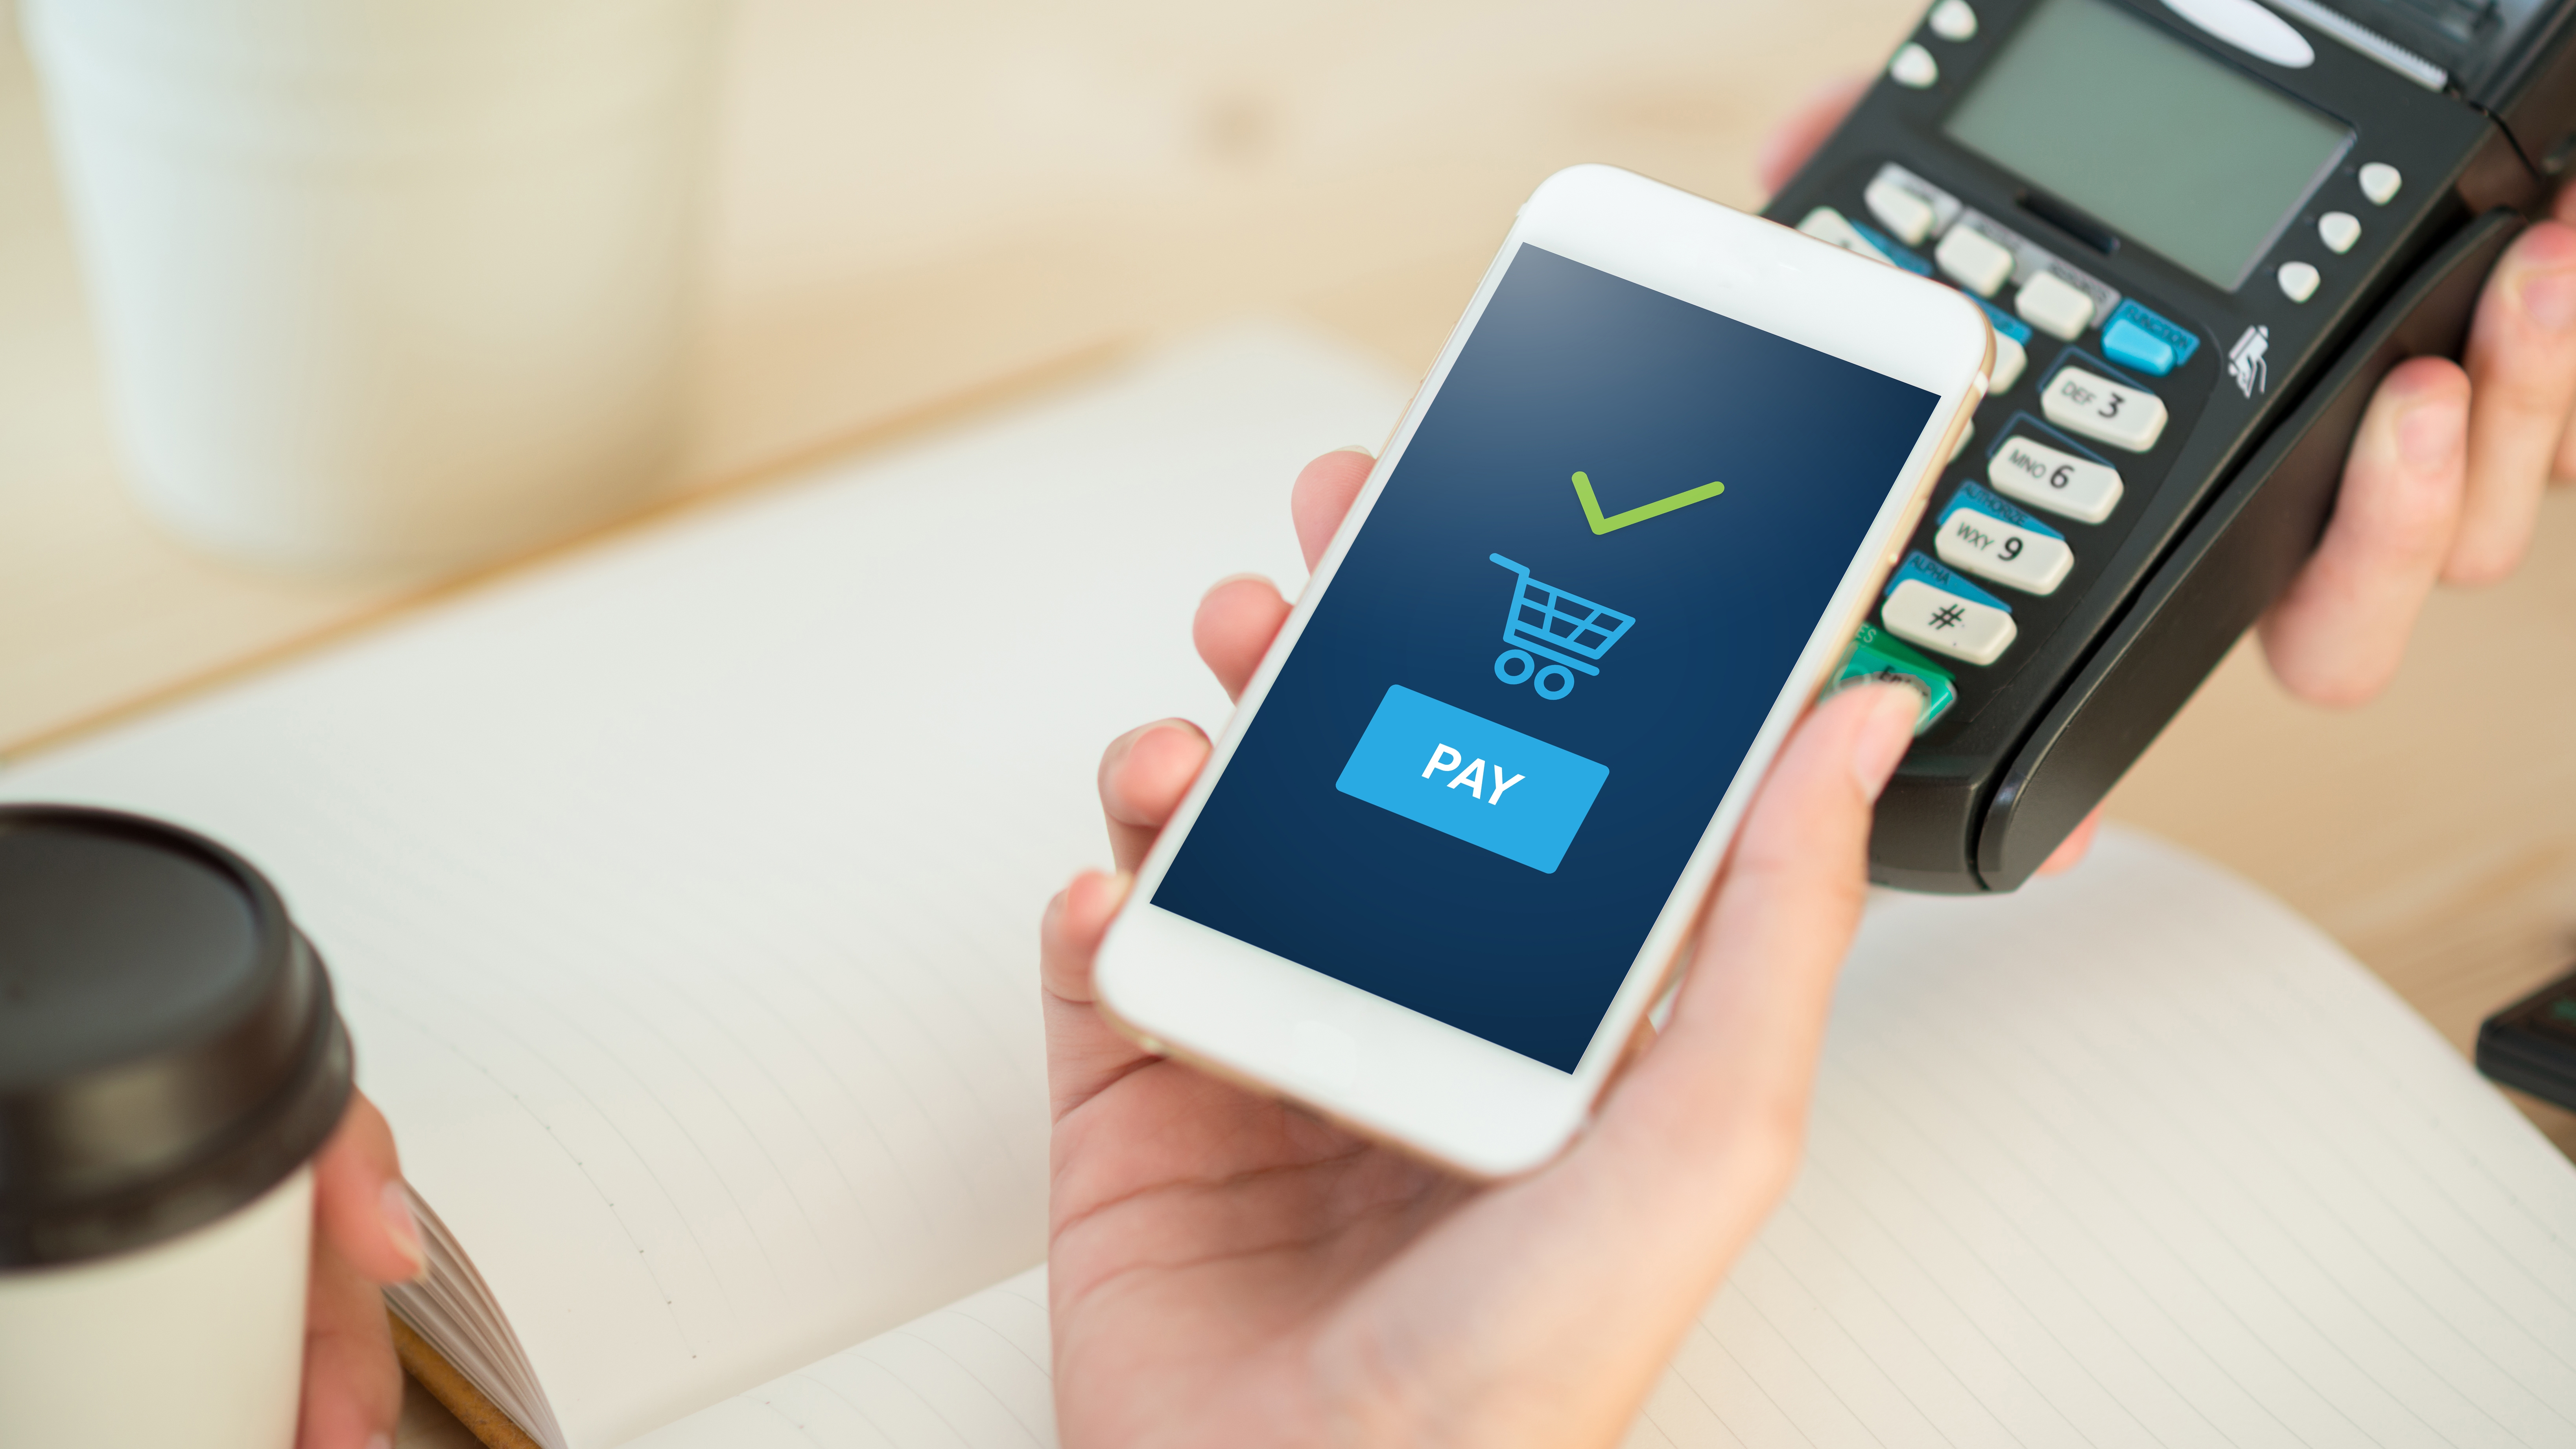 Apple Pay has arrived in Argentina: how to pay with the iPhone and what are its advantages?